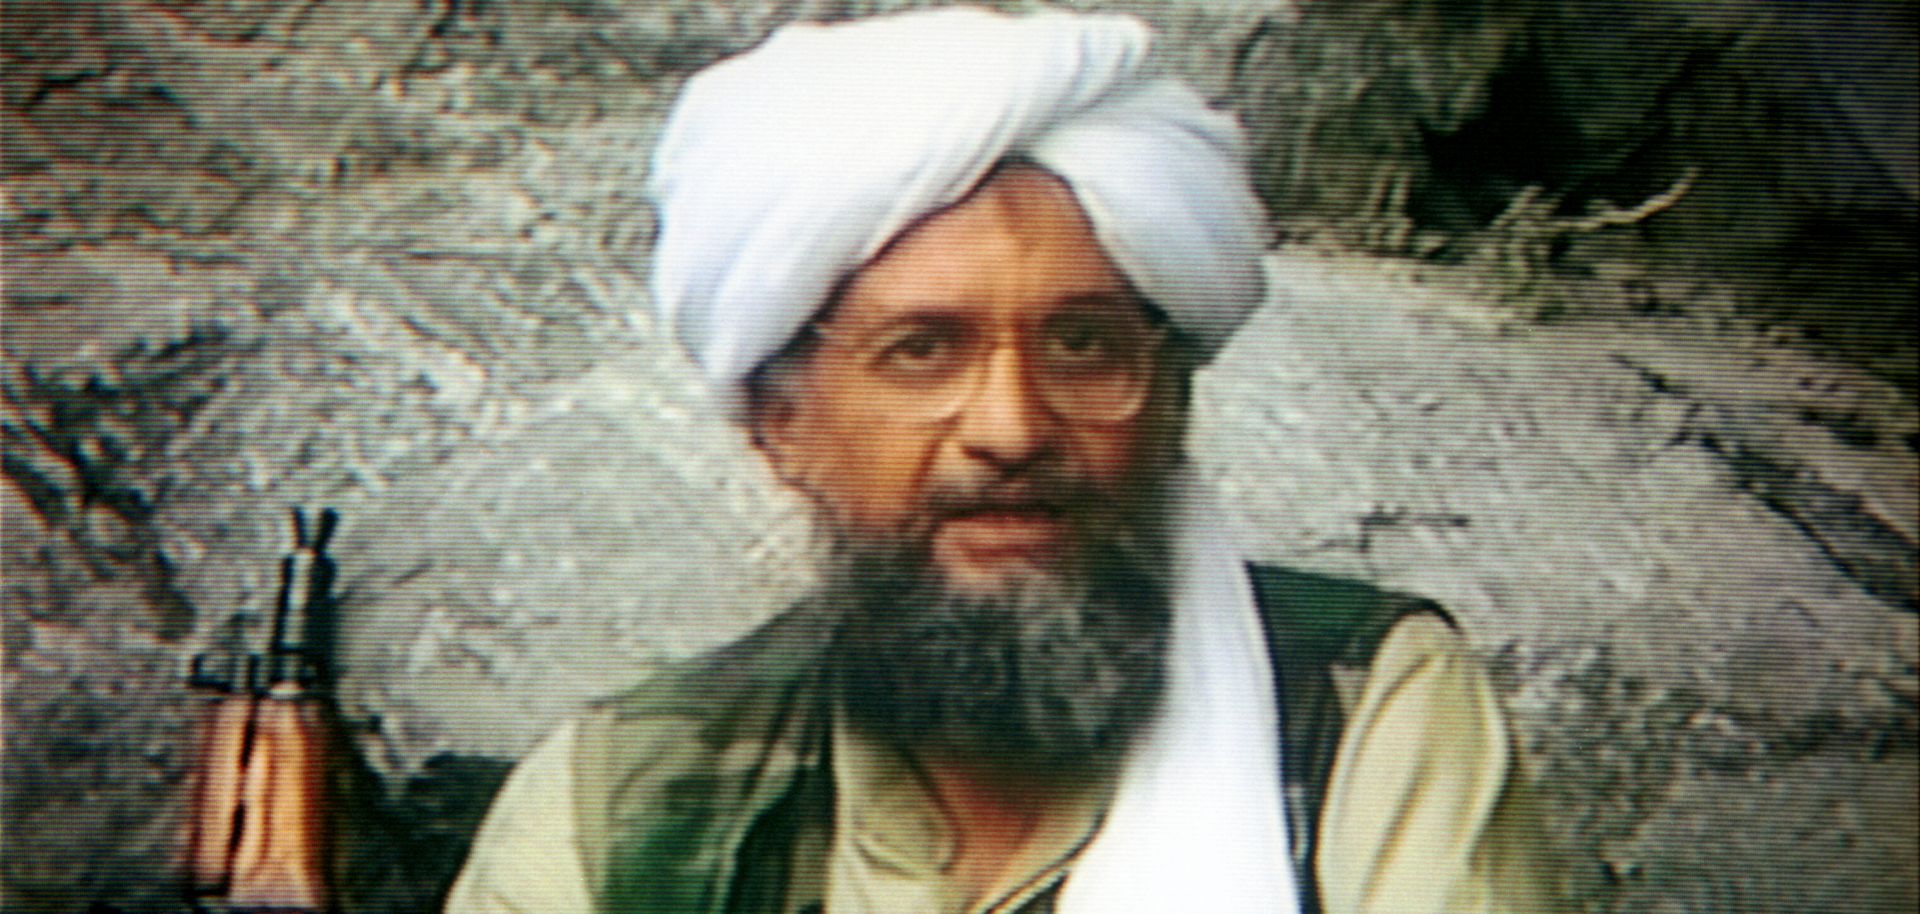 Ayman al-Zawahiri is seen on a television screen during a broadcast report. 